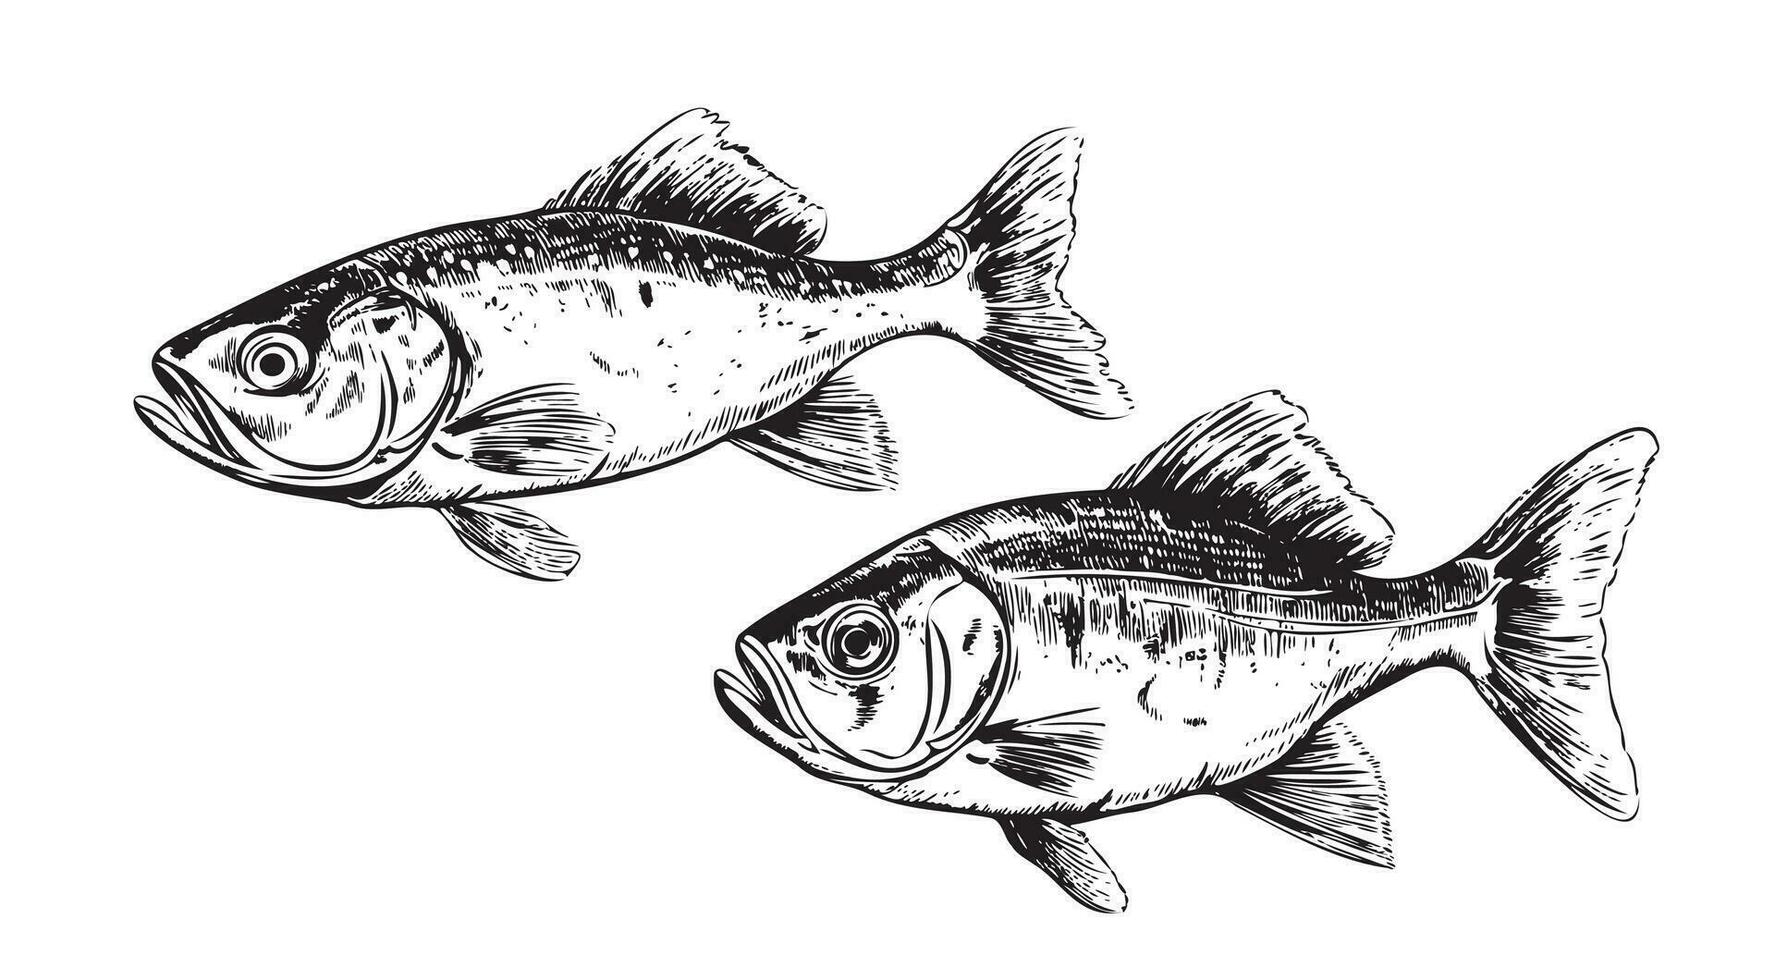 Two fish sketch hand drawn Vector illustration